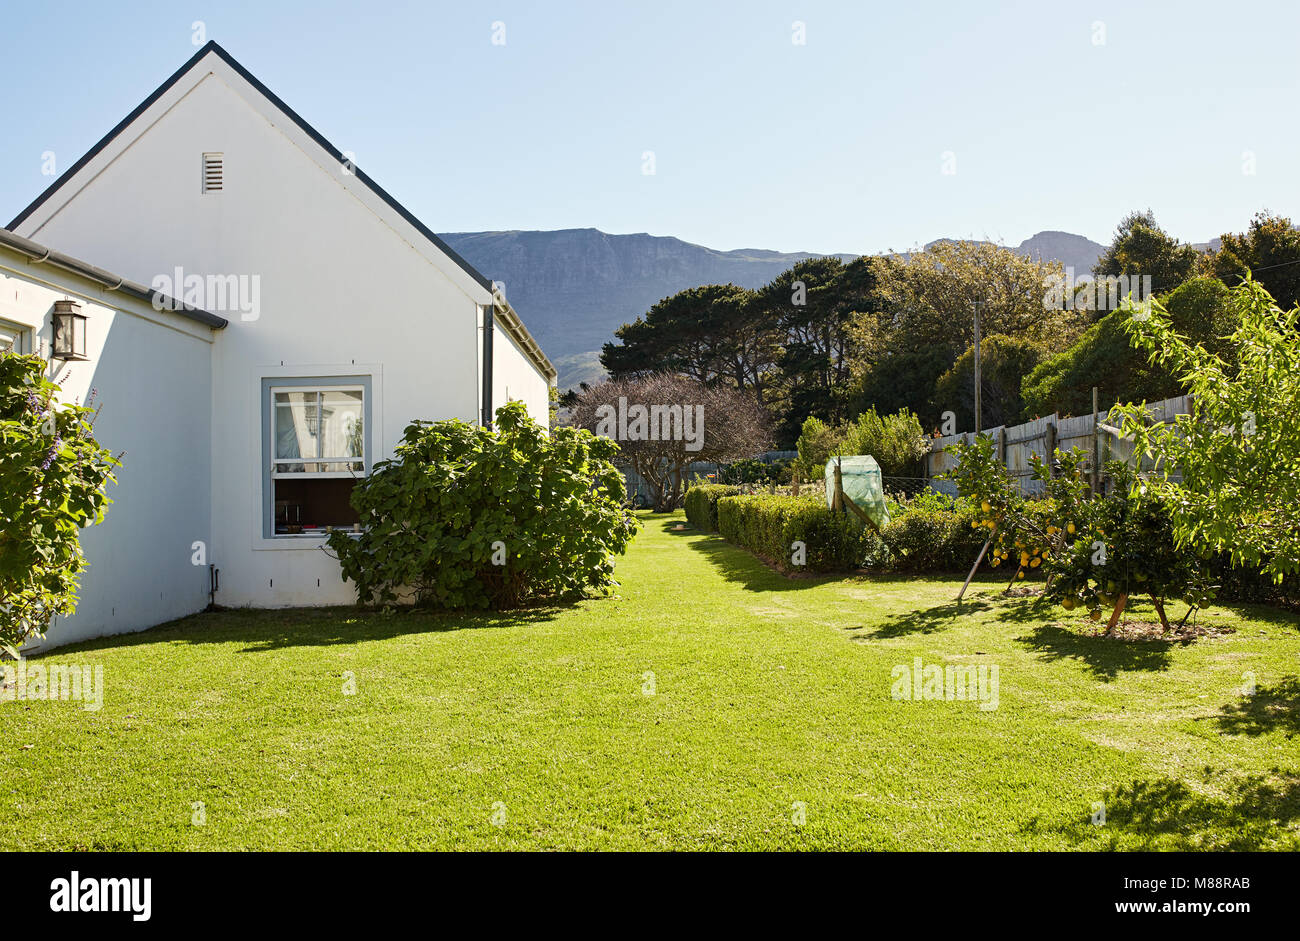 Exterior of the large grassy backyard and back of a residential home in the country on a sunny day Stock Photo